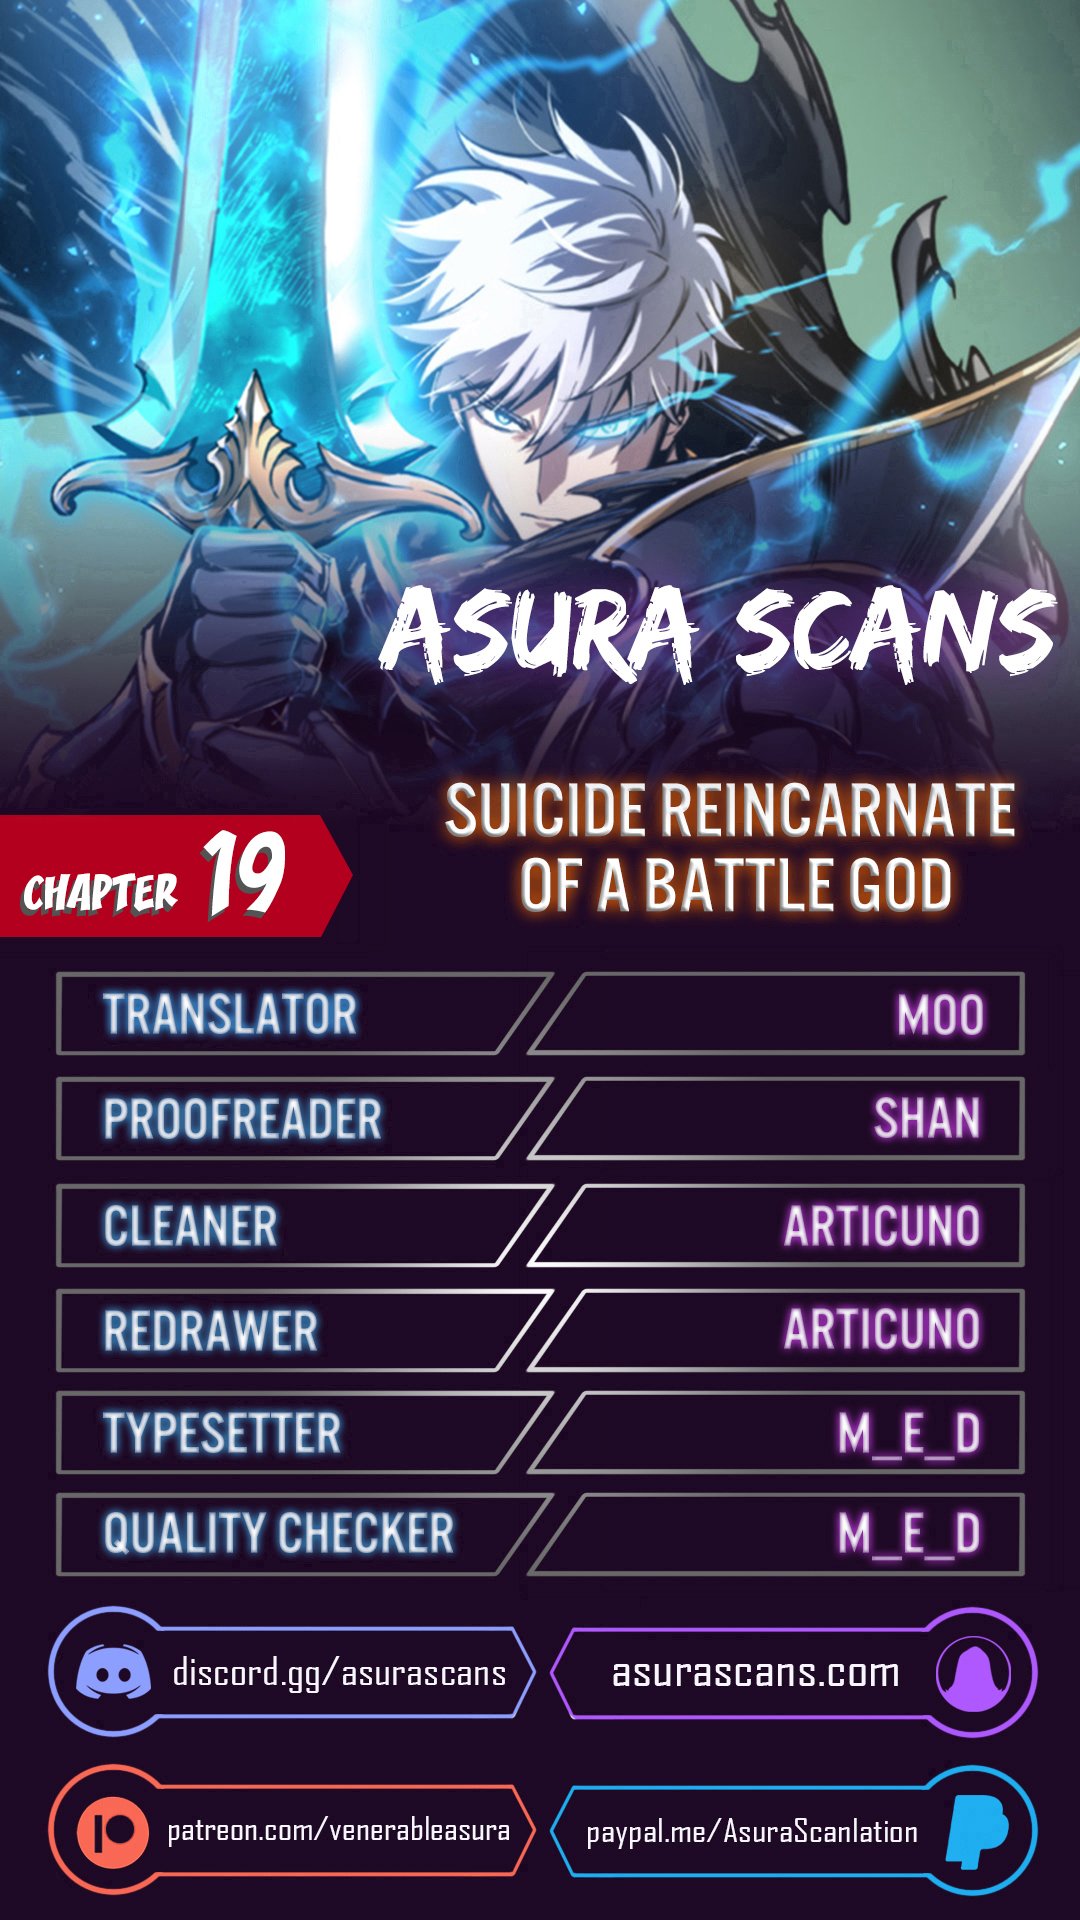 Reincarnation of the Suicidal Battle God - Chapter 20343 - Page 1